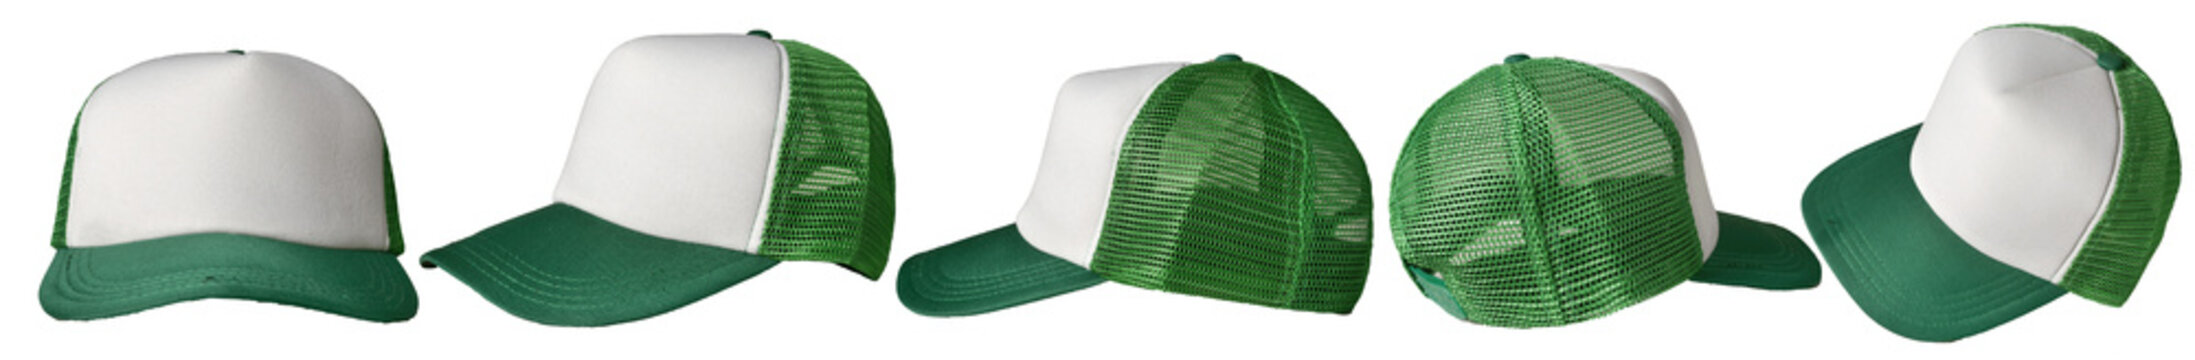 Set of green and white trucker cap hat mockup template collection, various angle isolated cut out object